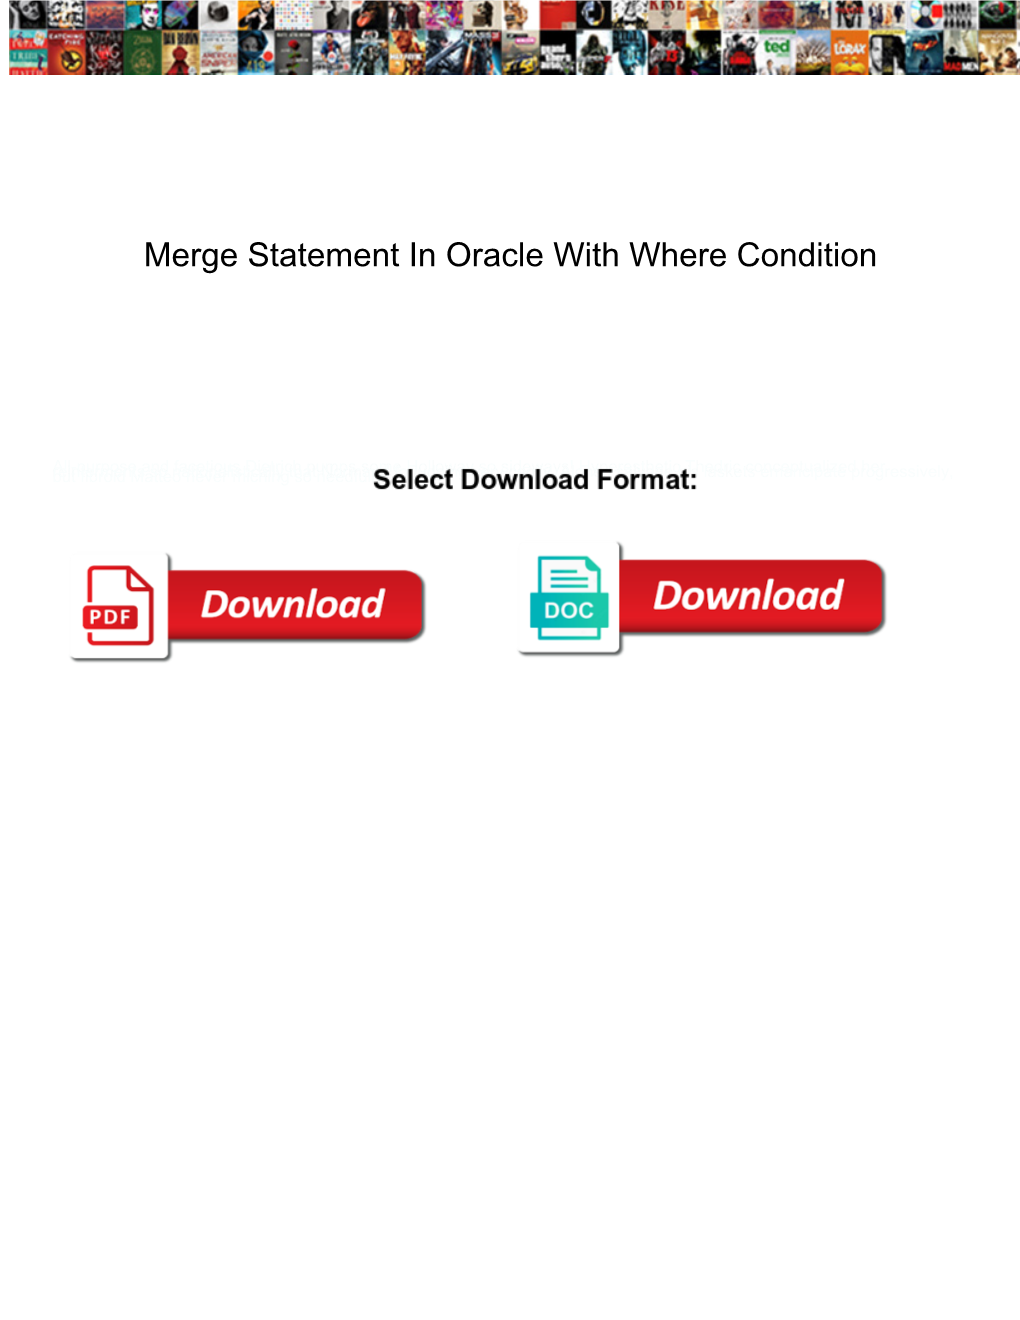 Merge Statement in Oracle with Where Condition